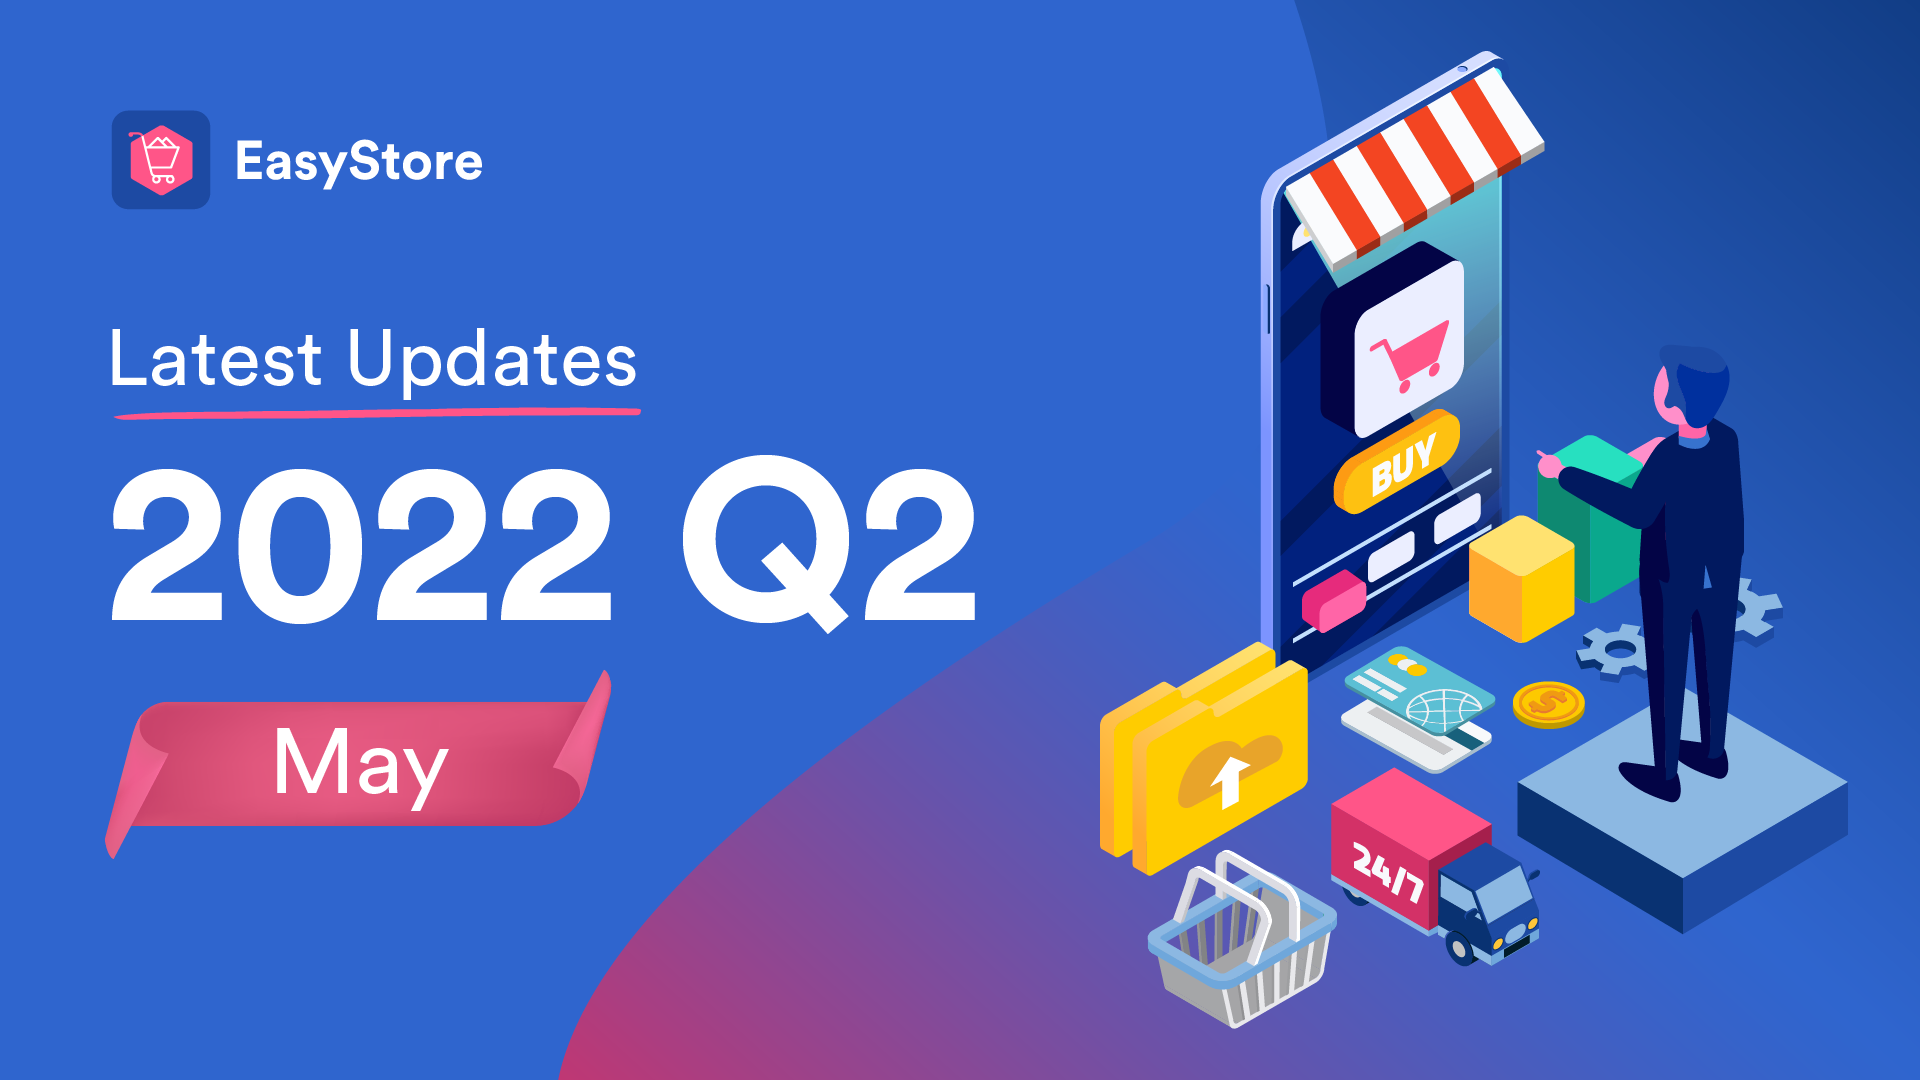 EasyStore Latest Updates: May 2022 | EasyStore